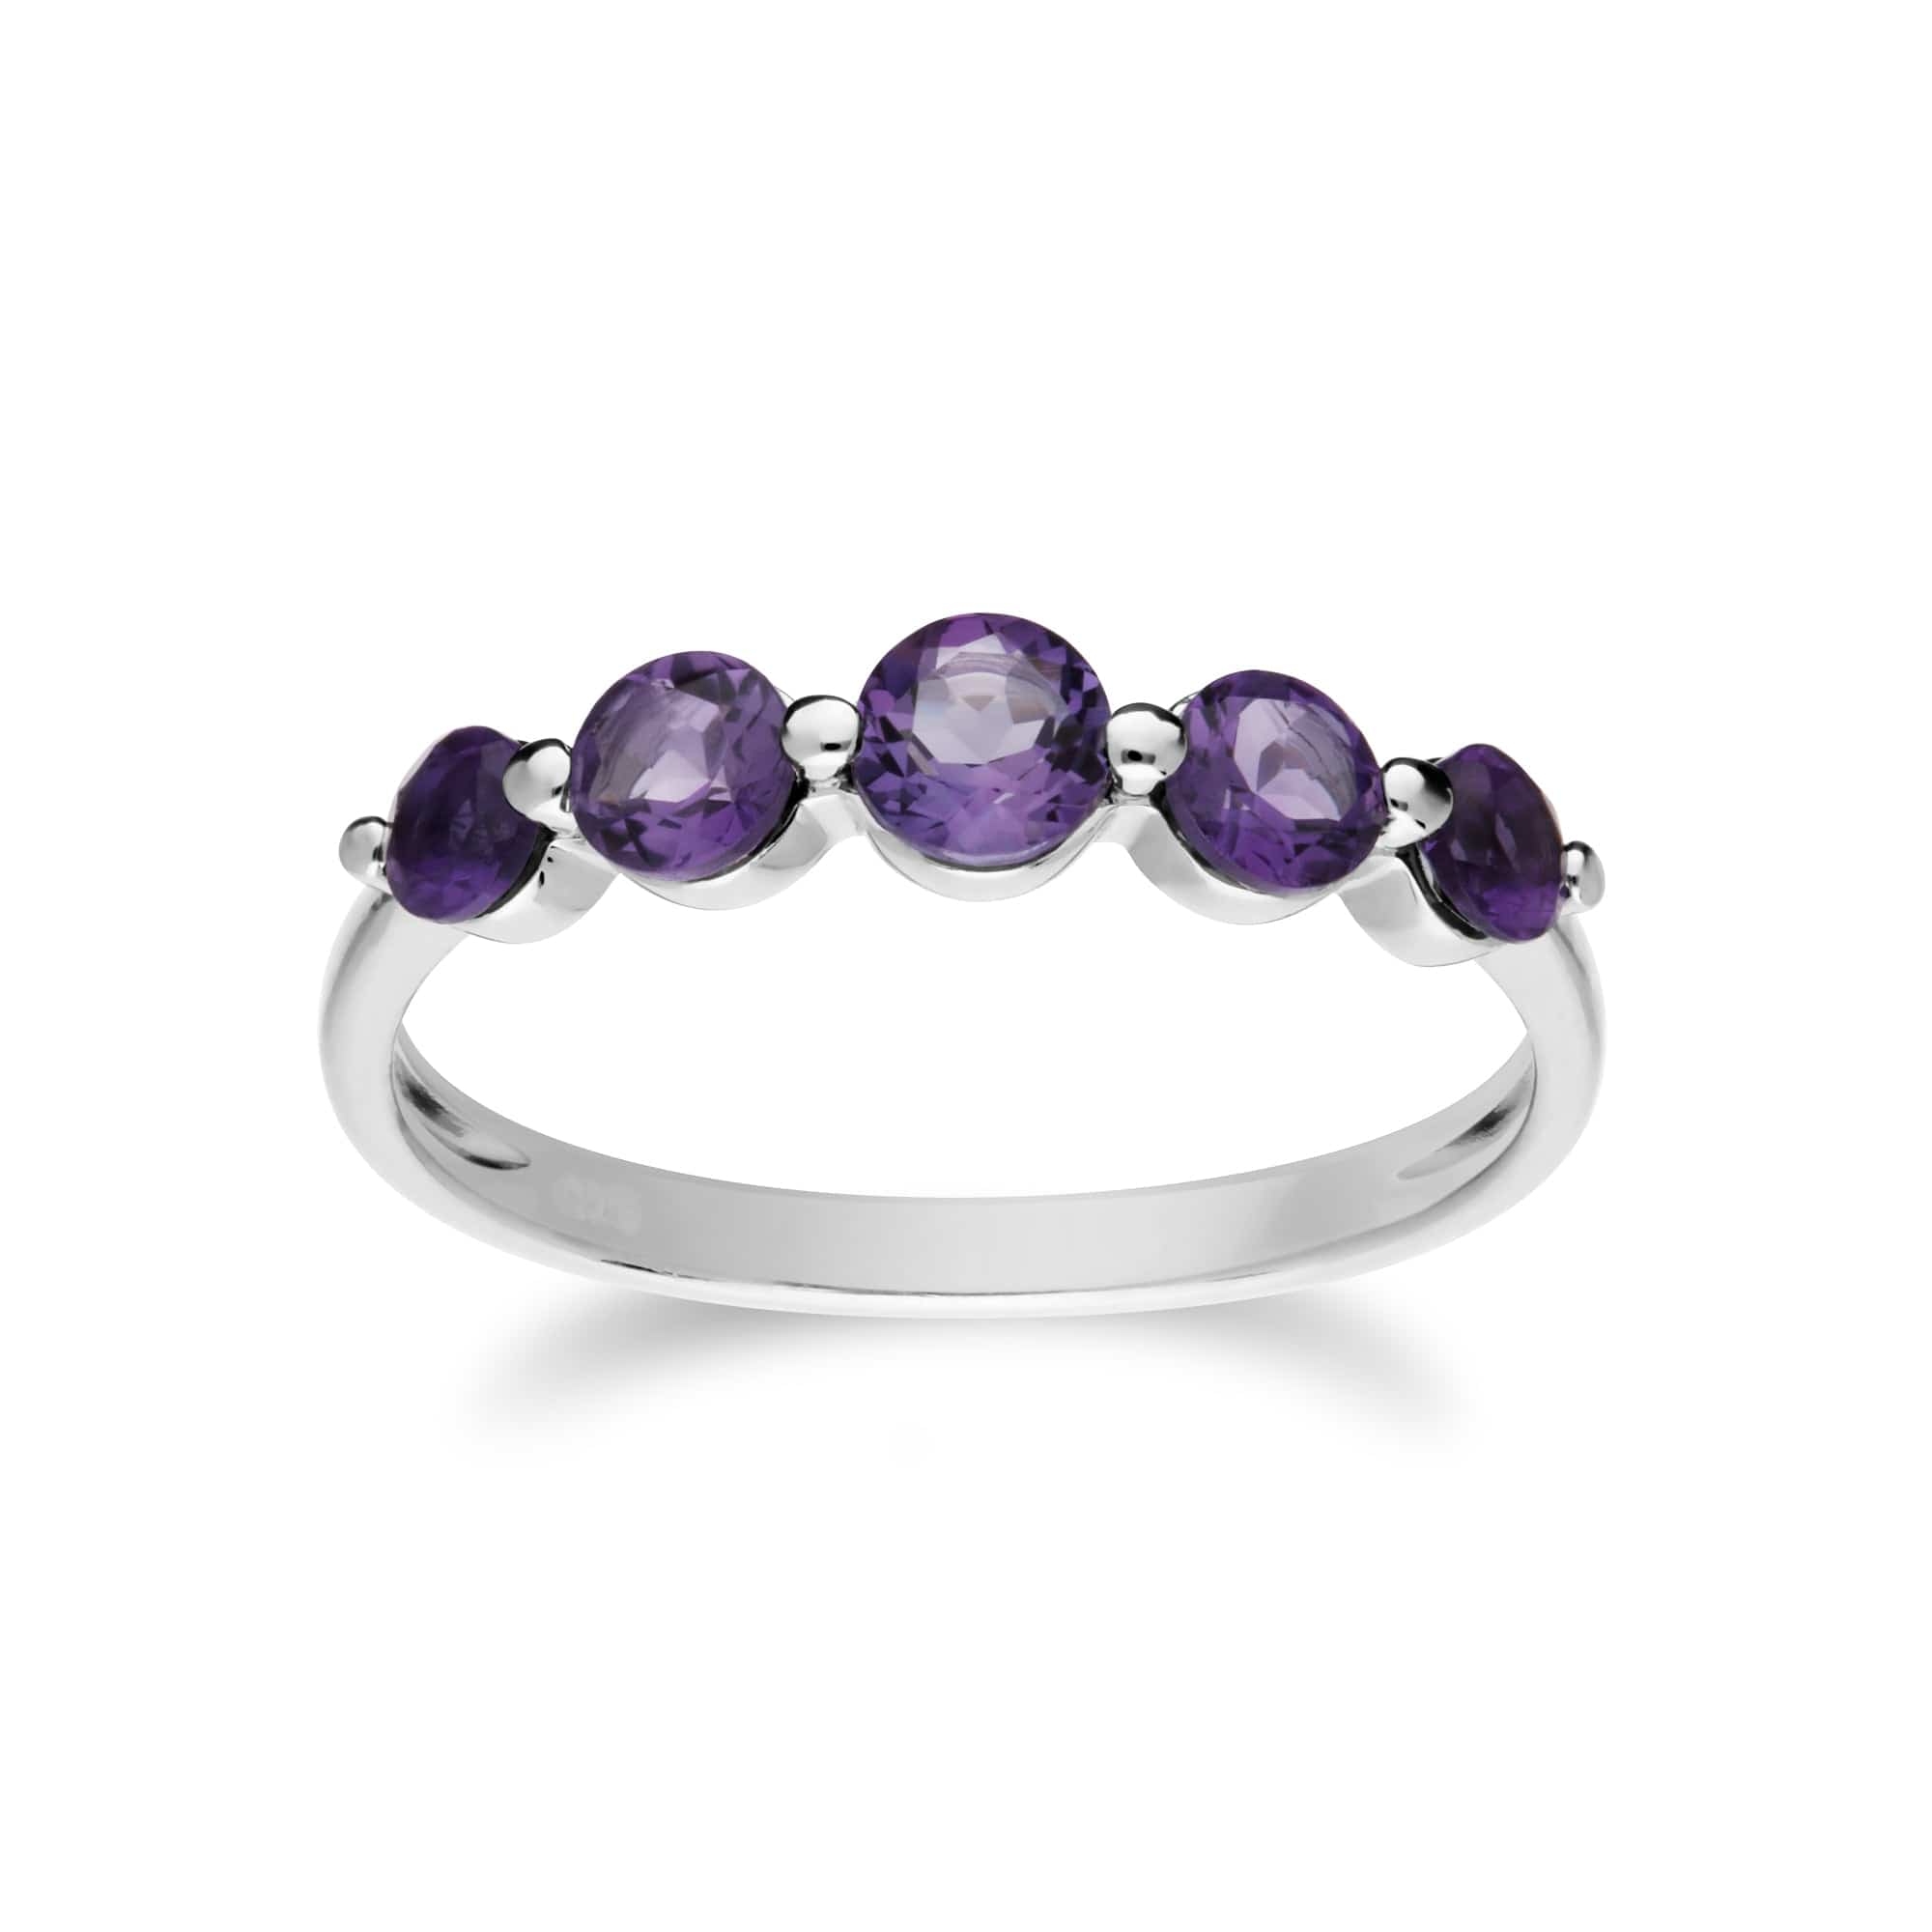 270E025503925-270R055903925 Classic Round Amethyst Three Stone Gradient Earrings & Five Stone Ring Set in 925 Sterling Silver 3